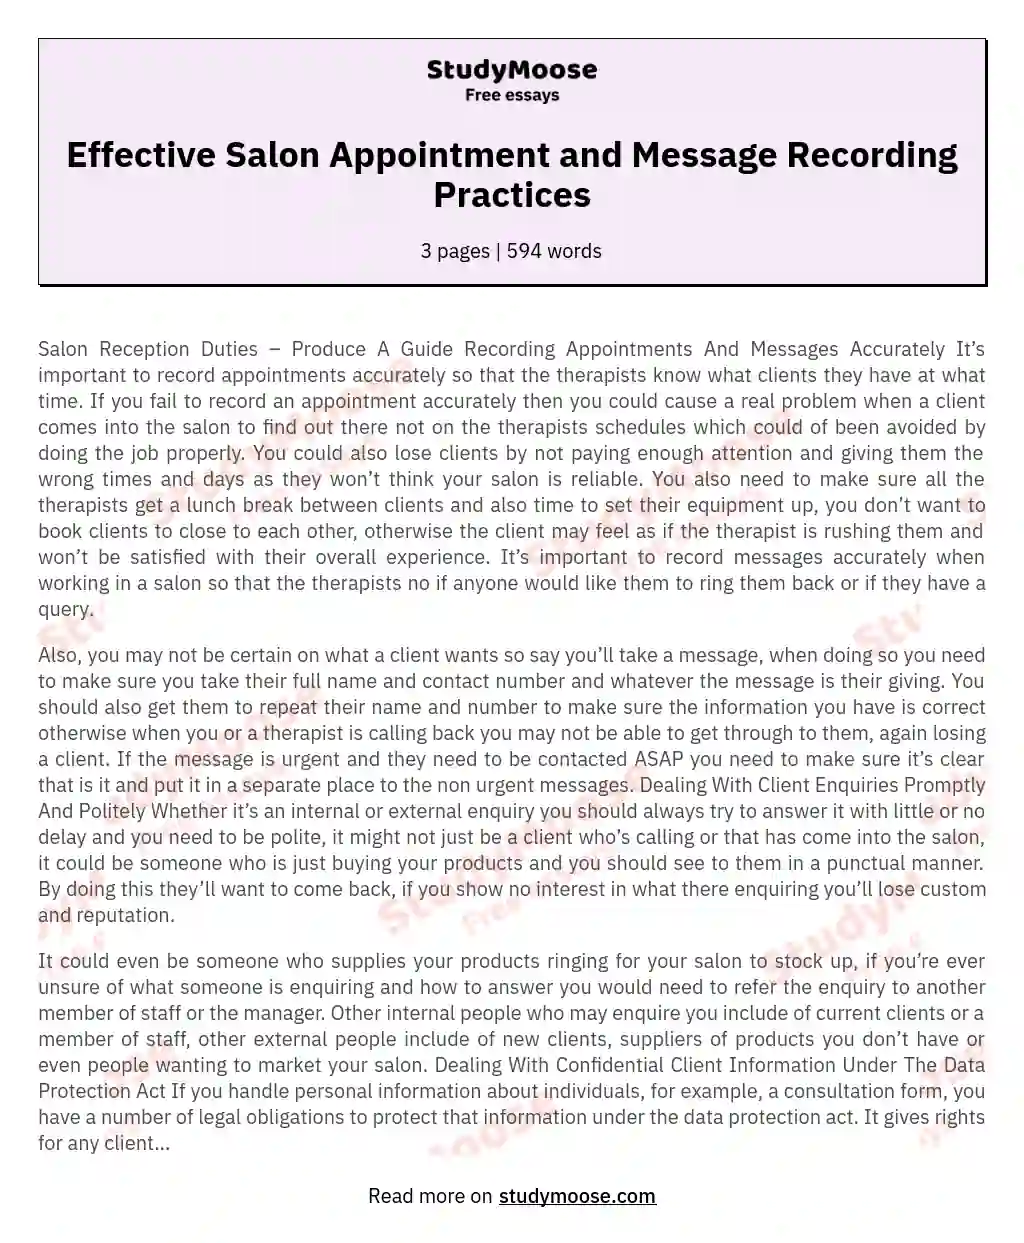 Effective Salon Appointment and Message Recording Practices